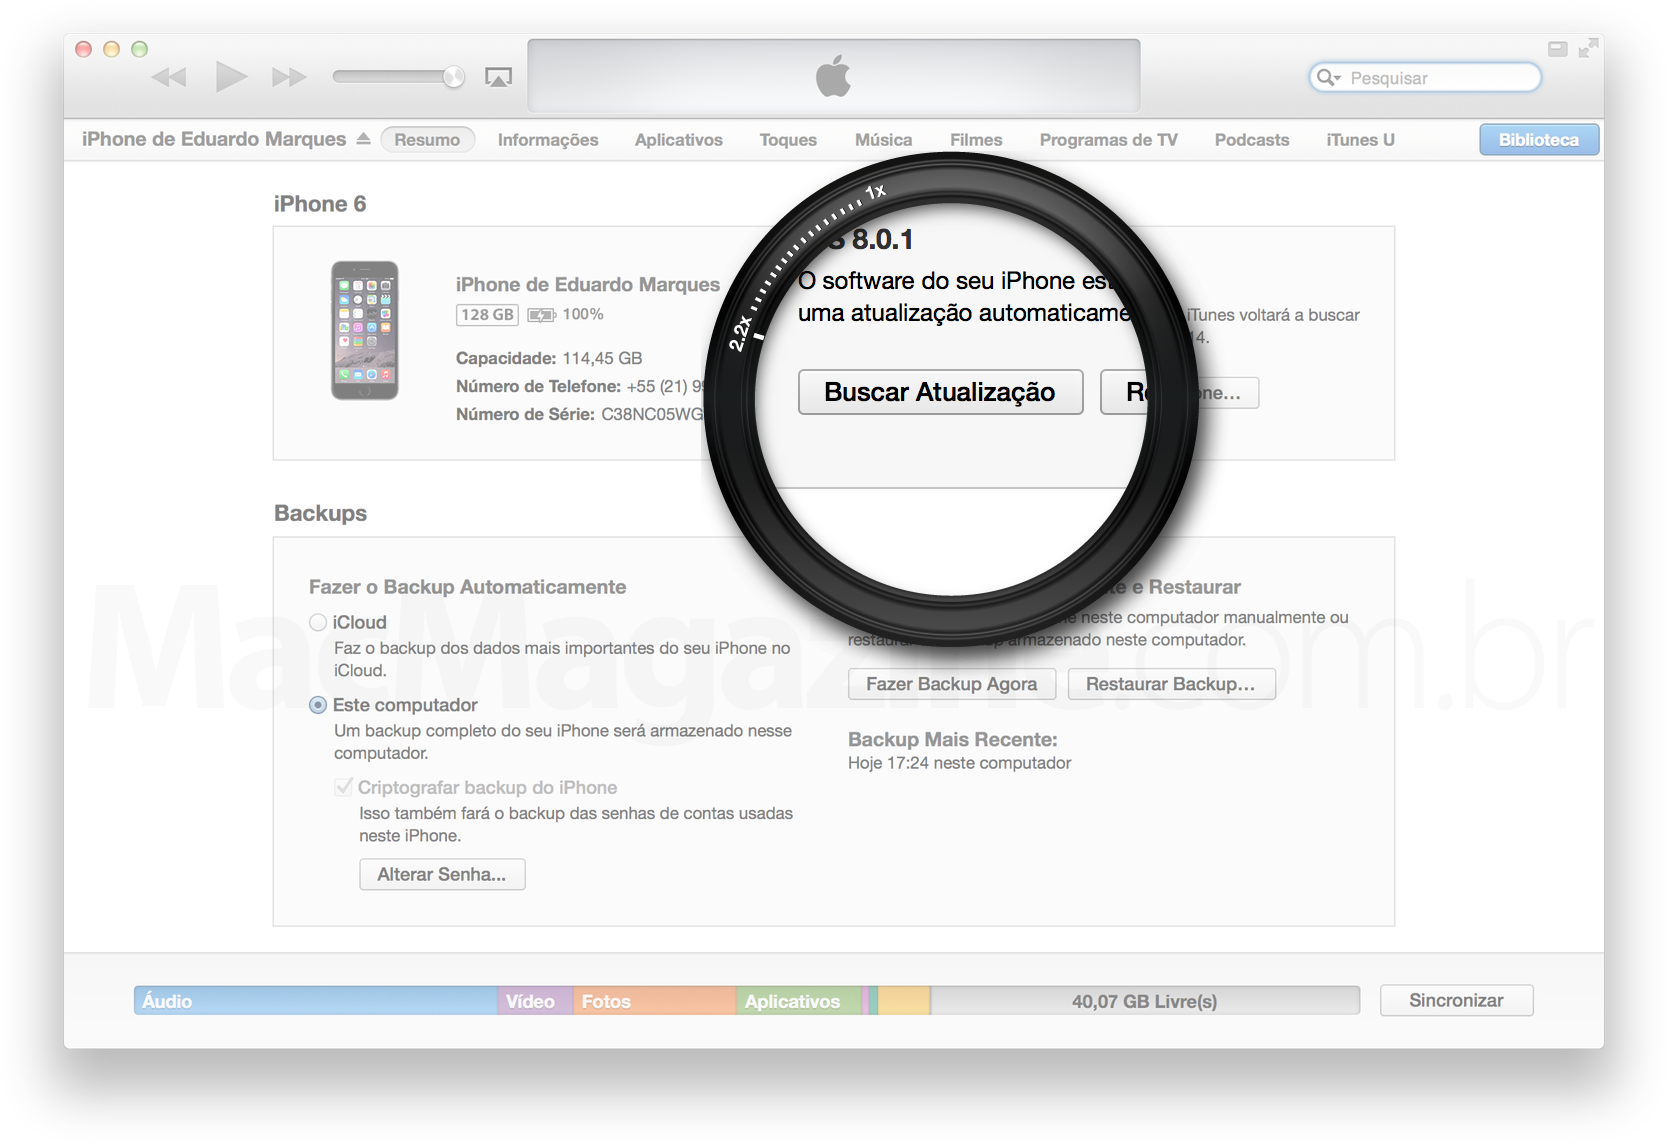 Installing iOS 8 manually in iTunes